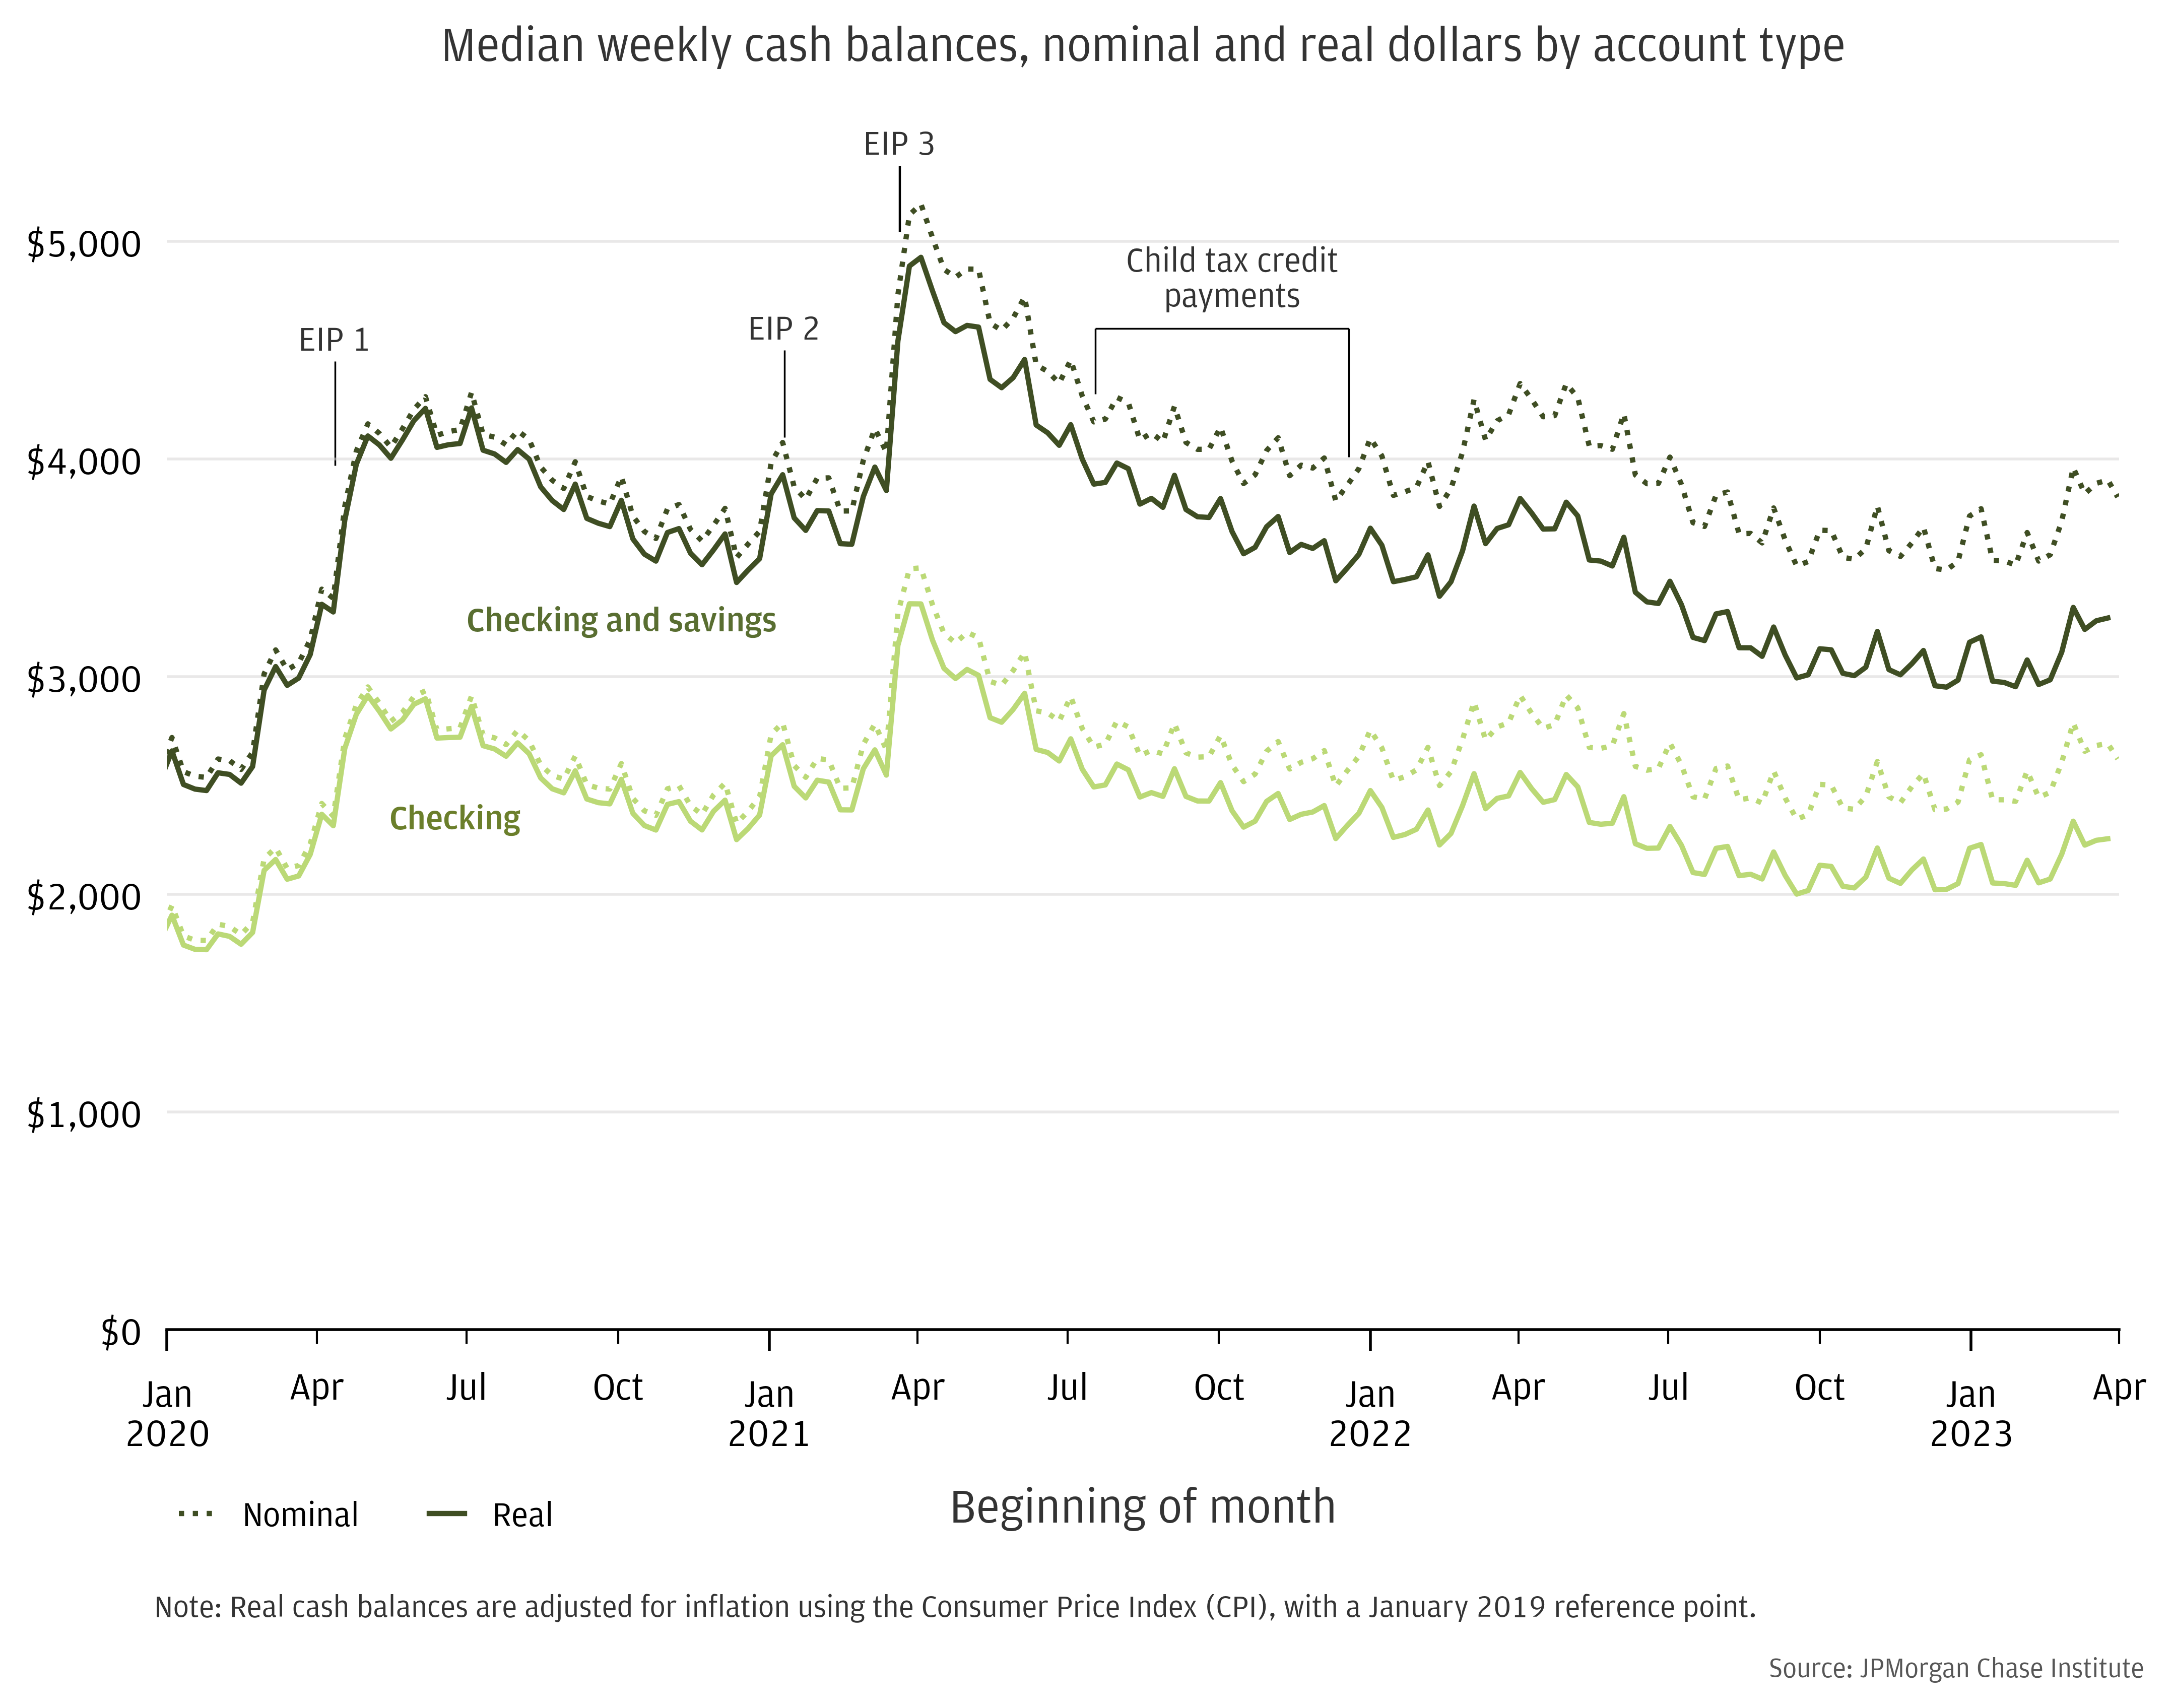 Median weekly cash balances, nominal and real dollars by account type